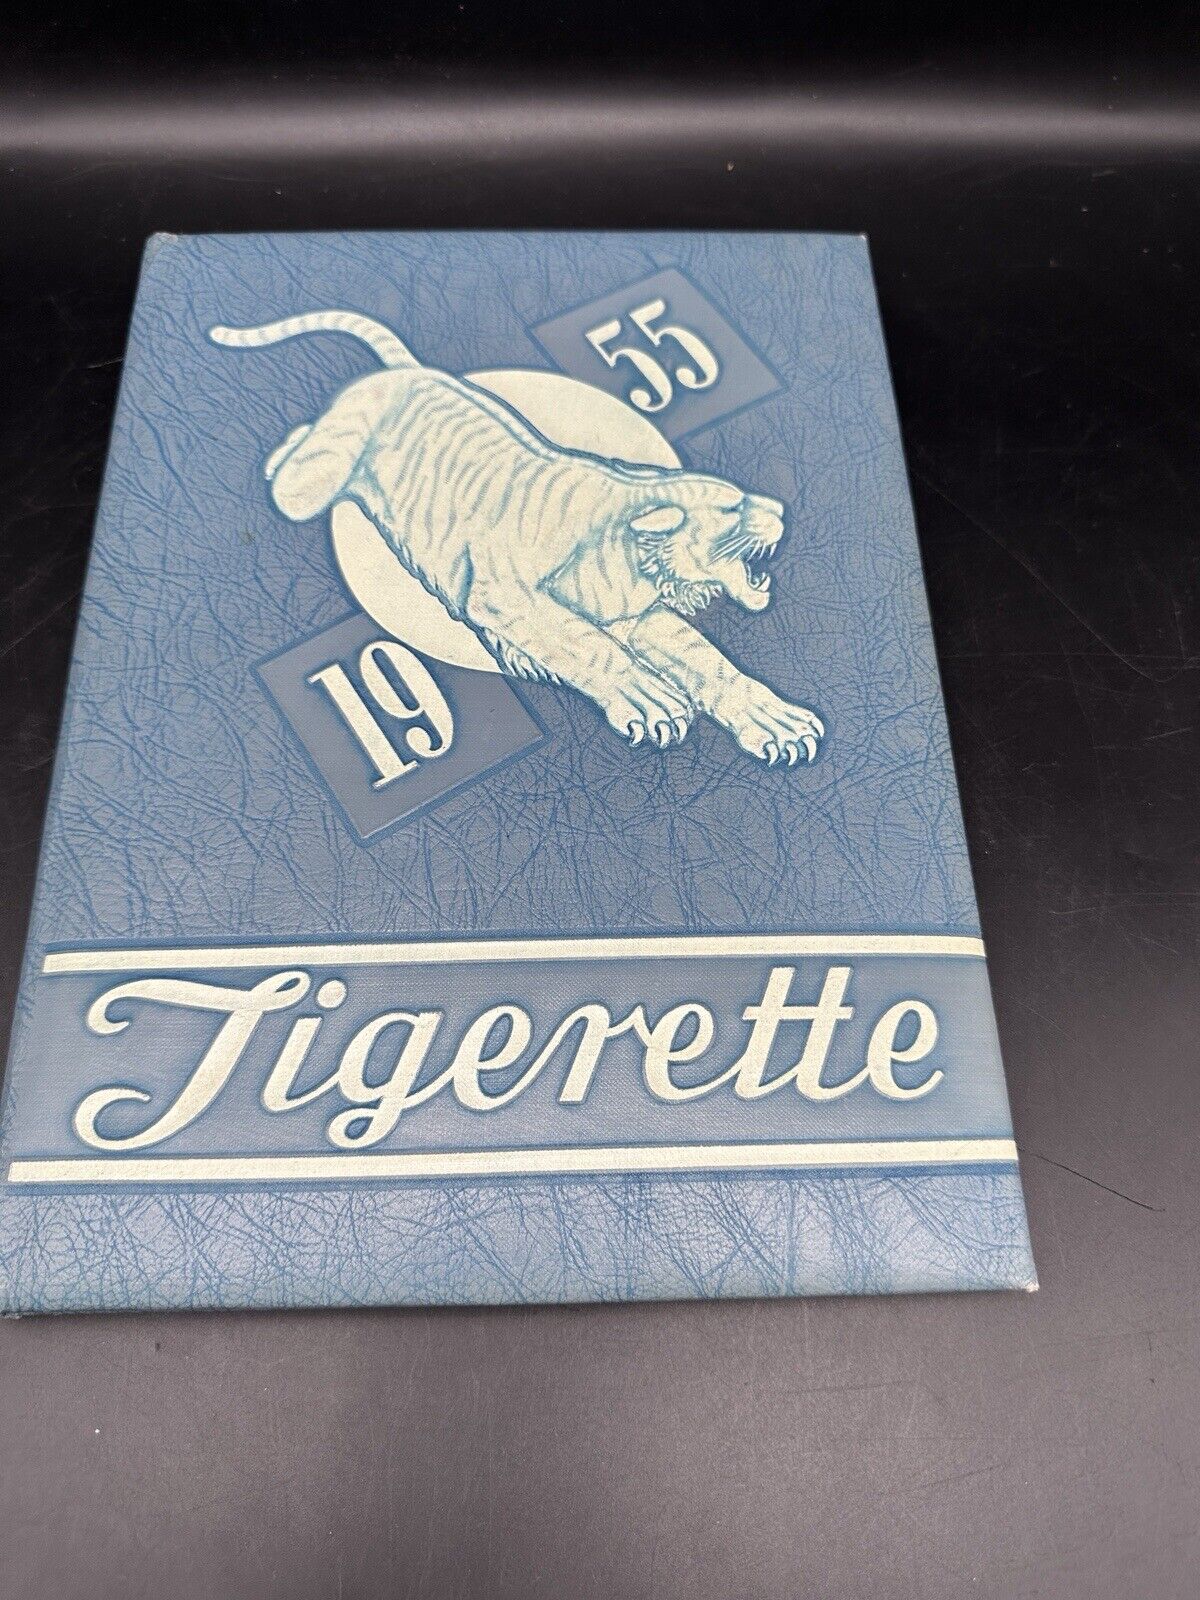 1955 Tigerette Yearbook Chilton WI High School Wisconsin